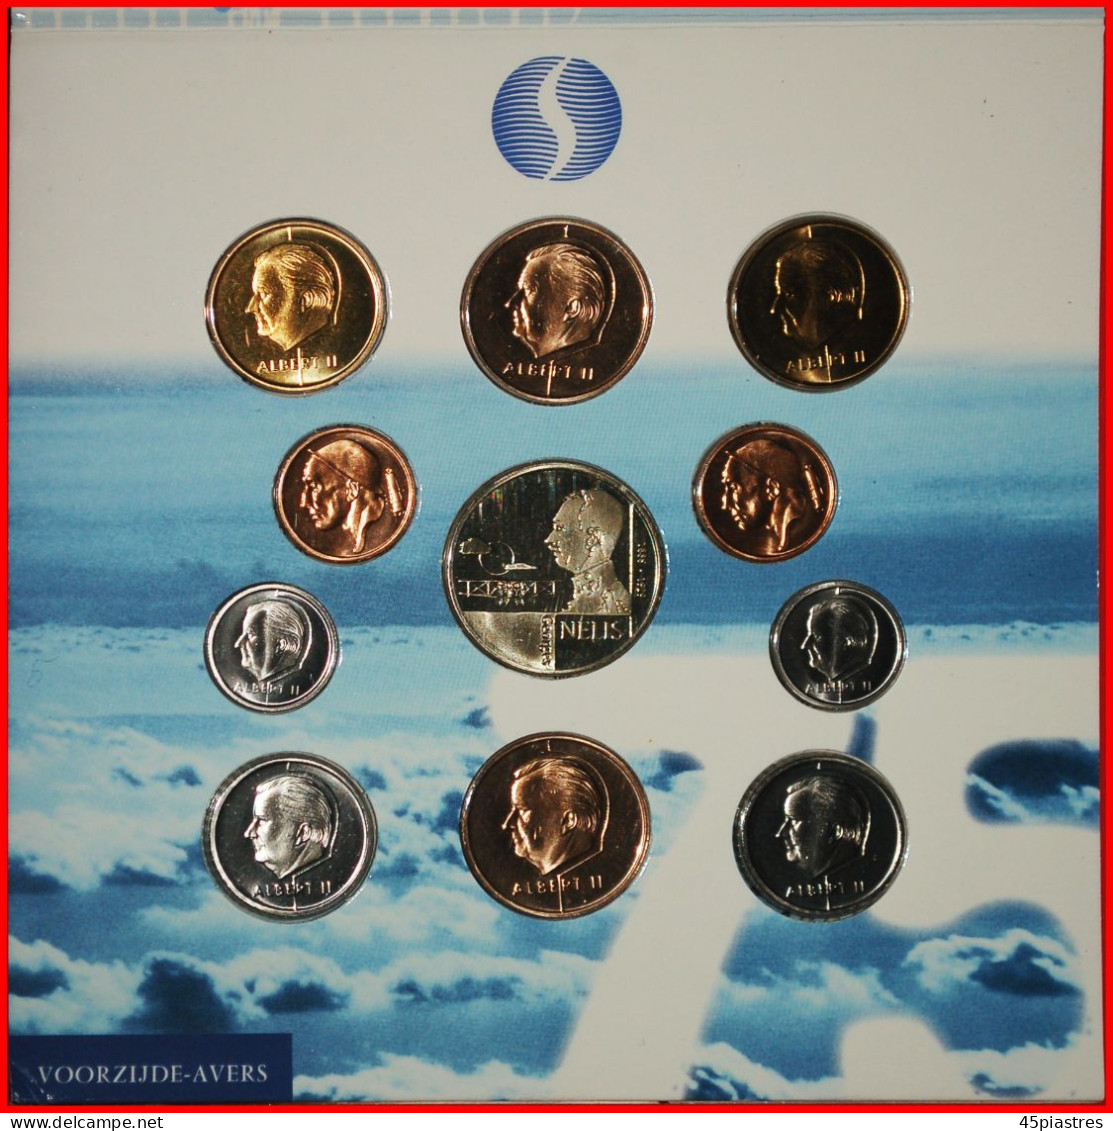 * PLANE 1923 - SWITZERLAND 1995: BELGIUM  MINT SET 1998 10 COINS WITH MEDAL!  · LOW START · NO RESERVE! - FDC, BU, Proofs & Presentation Cases